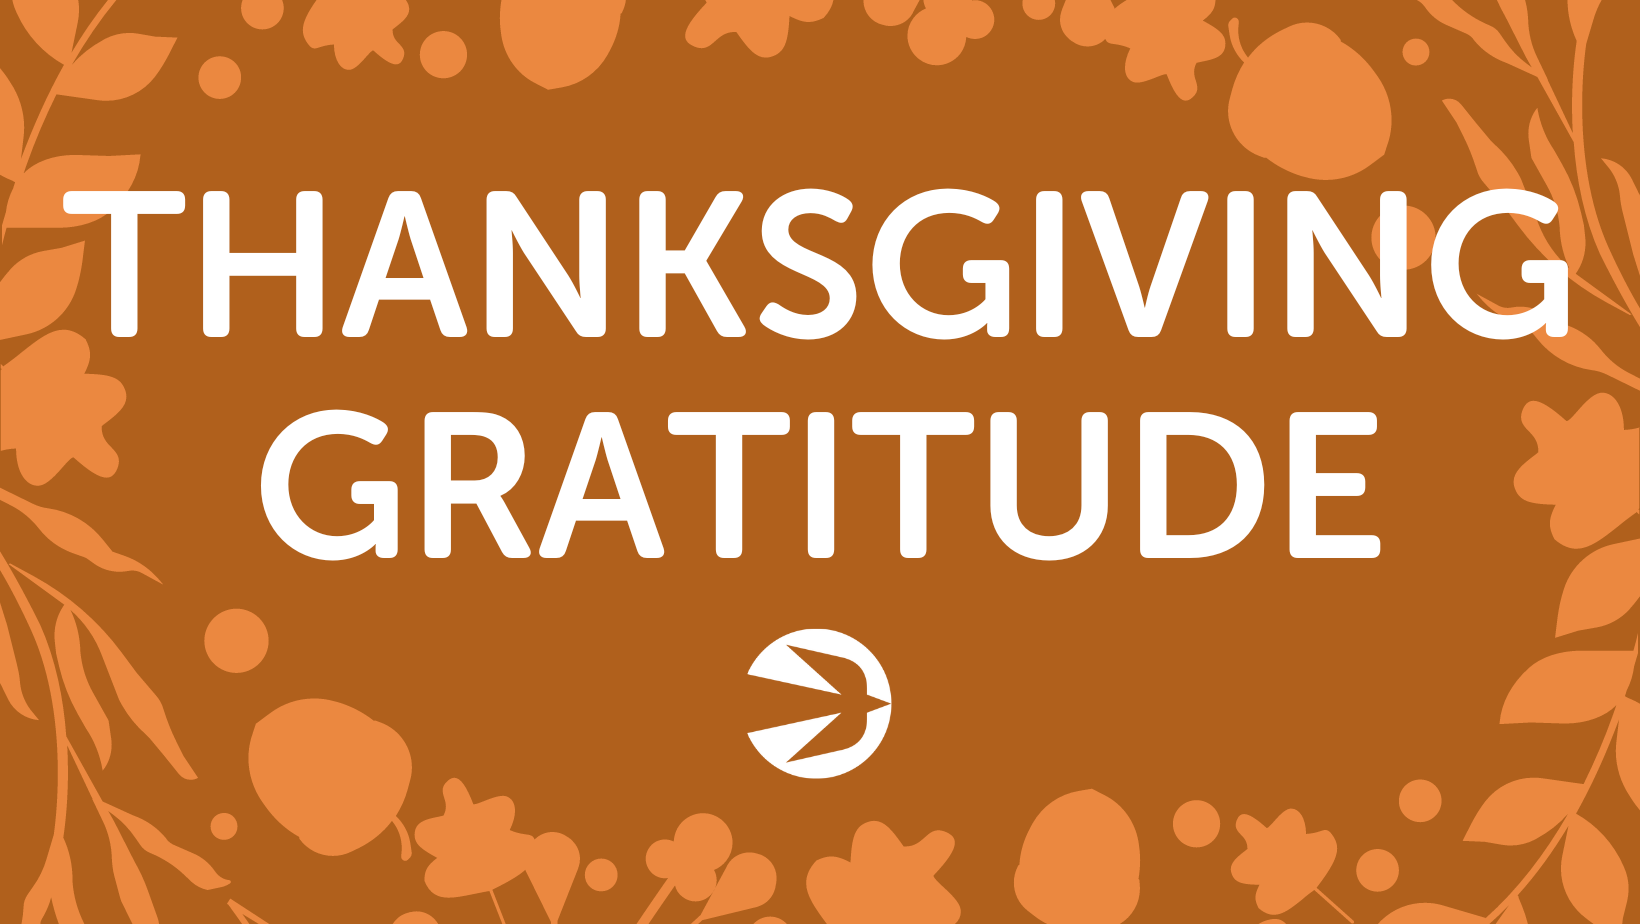 A brown background with an orange floral border and white text in the center that reads "THANKSGIVING GRATITUDE." Below the text is an icon of a white bird in flight.